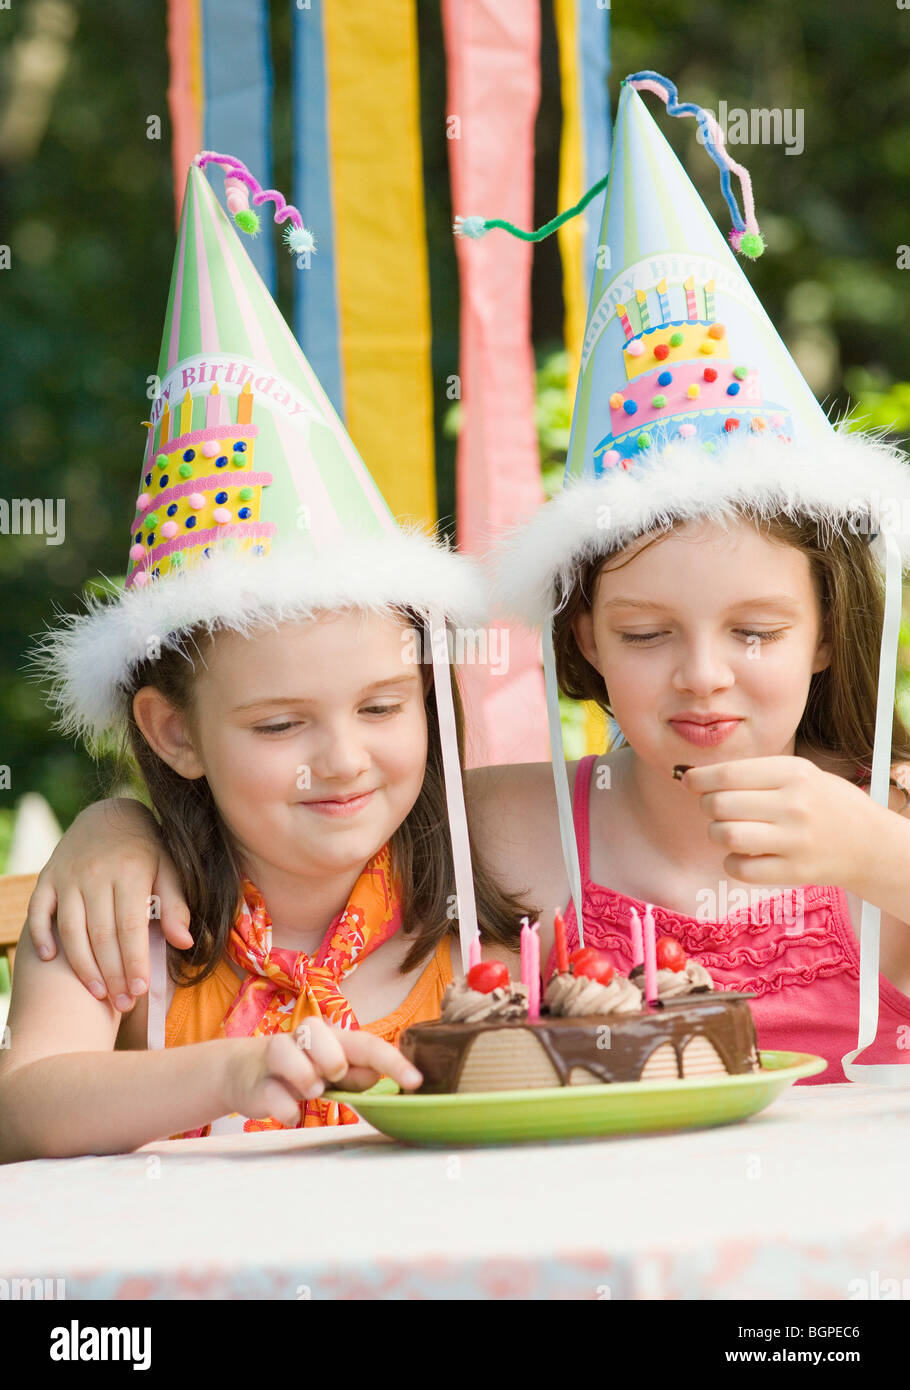 Two girls eating a birthday cake and smiling Stock Photo - Alamy